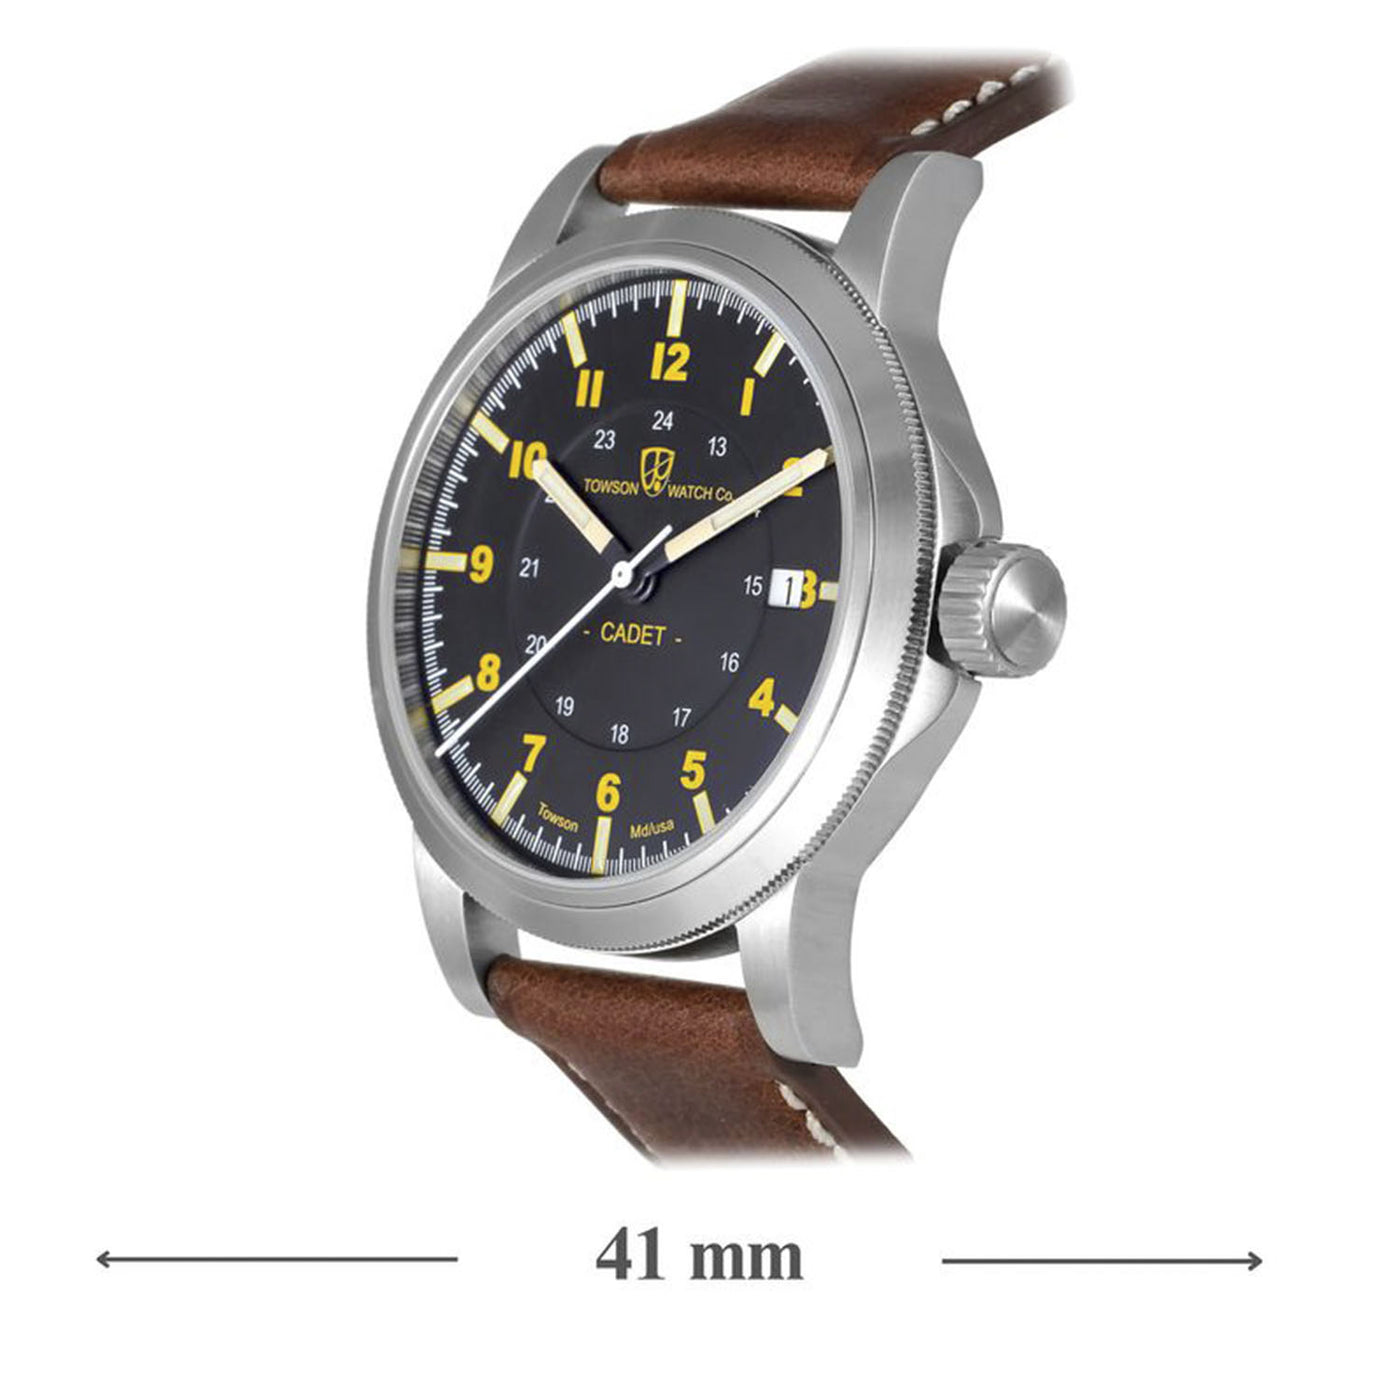 Towson Watch Company Recruit Automatic – CR250